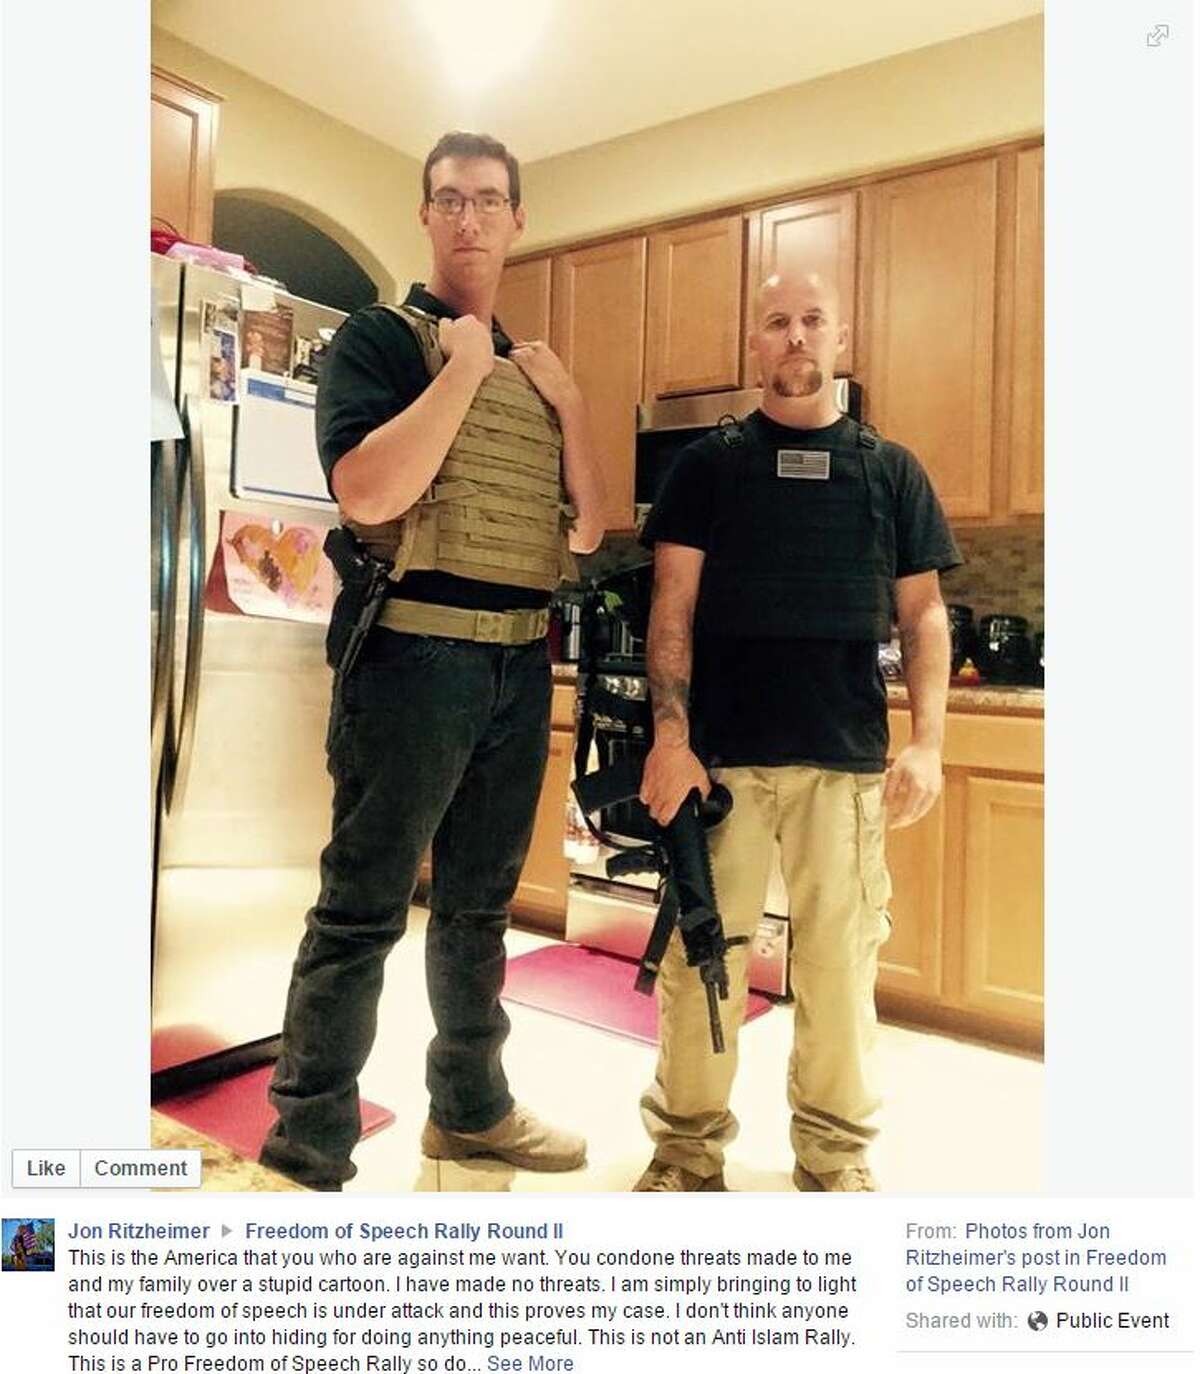 Jon Ritzheimer, a former U.S. Marine shown on his Facebook page wearing a t-shirt with the phrase "[expletive] Islam" while carrying an American flag, will stage a controversial contest Friday to draw the Islamic prophet Muhammad in front of an Arizona mosque attended by two attempted shooters who tried to attack a similar contest in Garland on May 3, 2015.